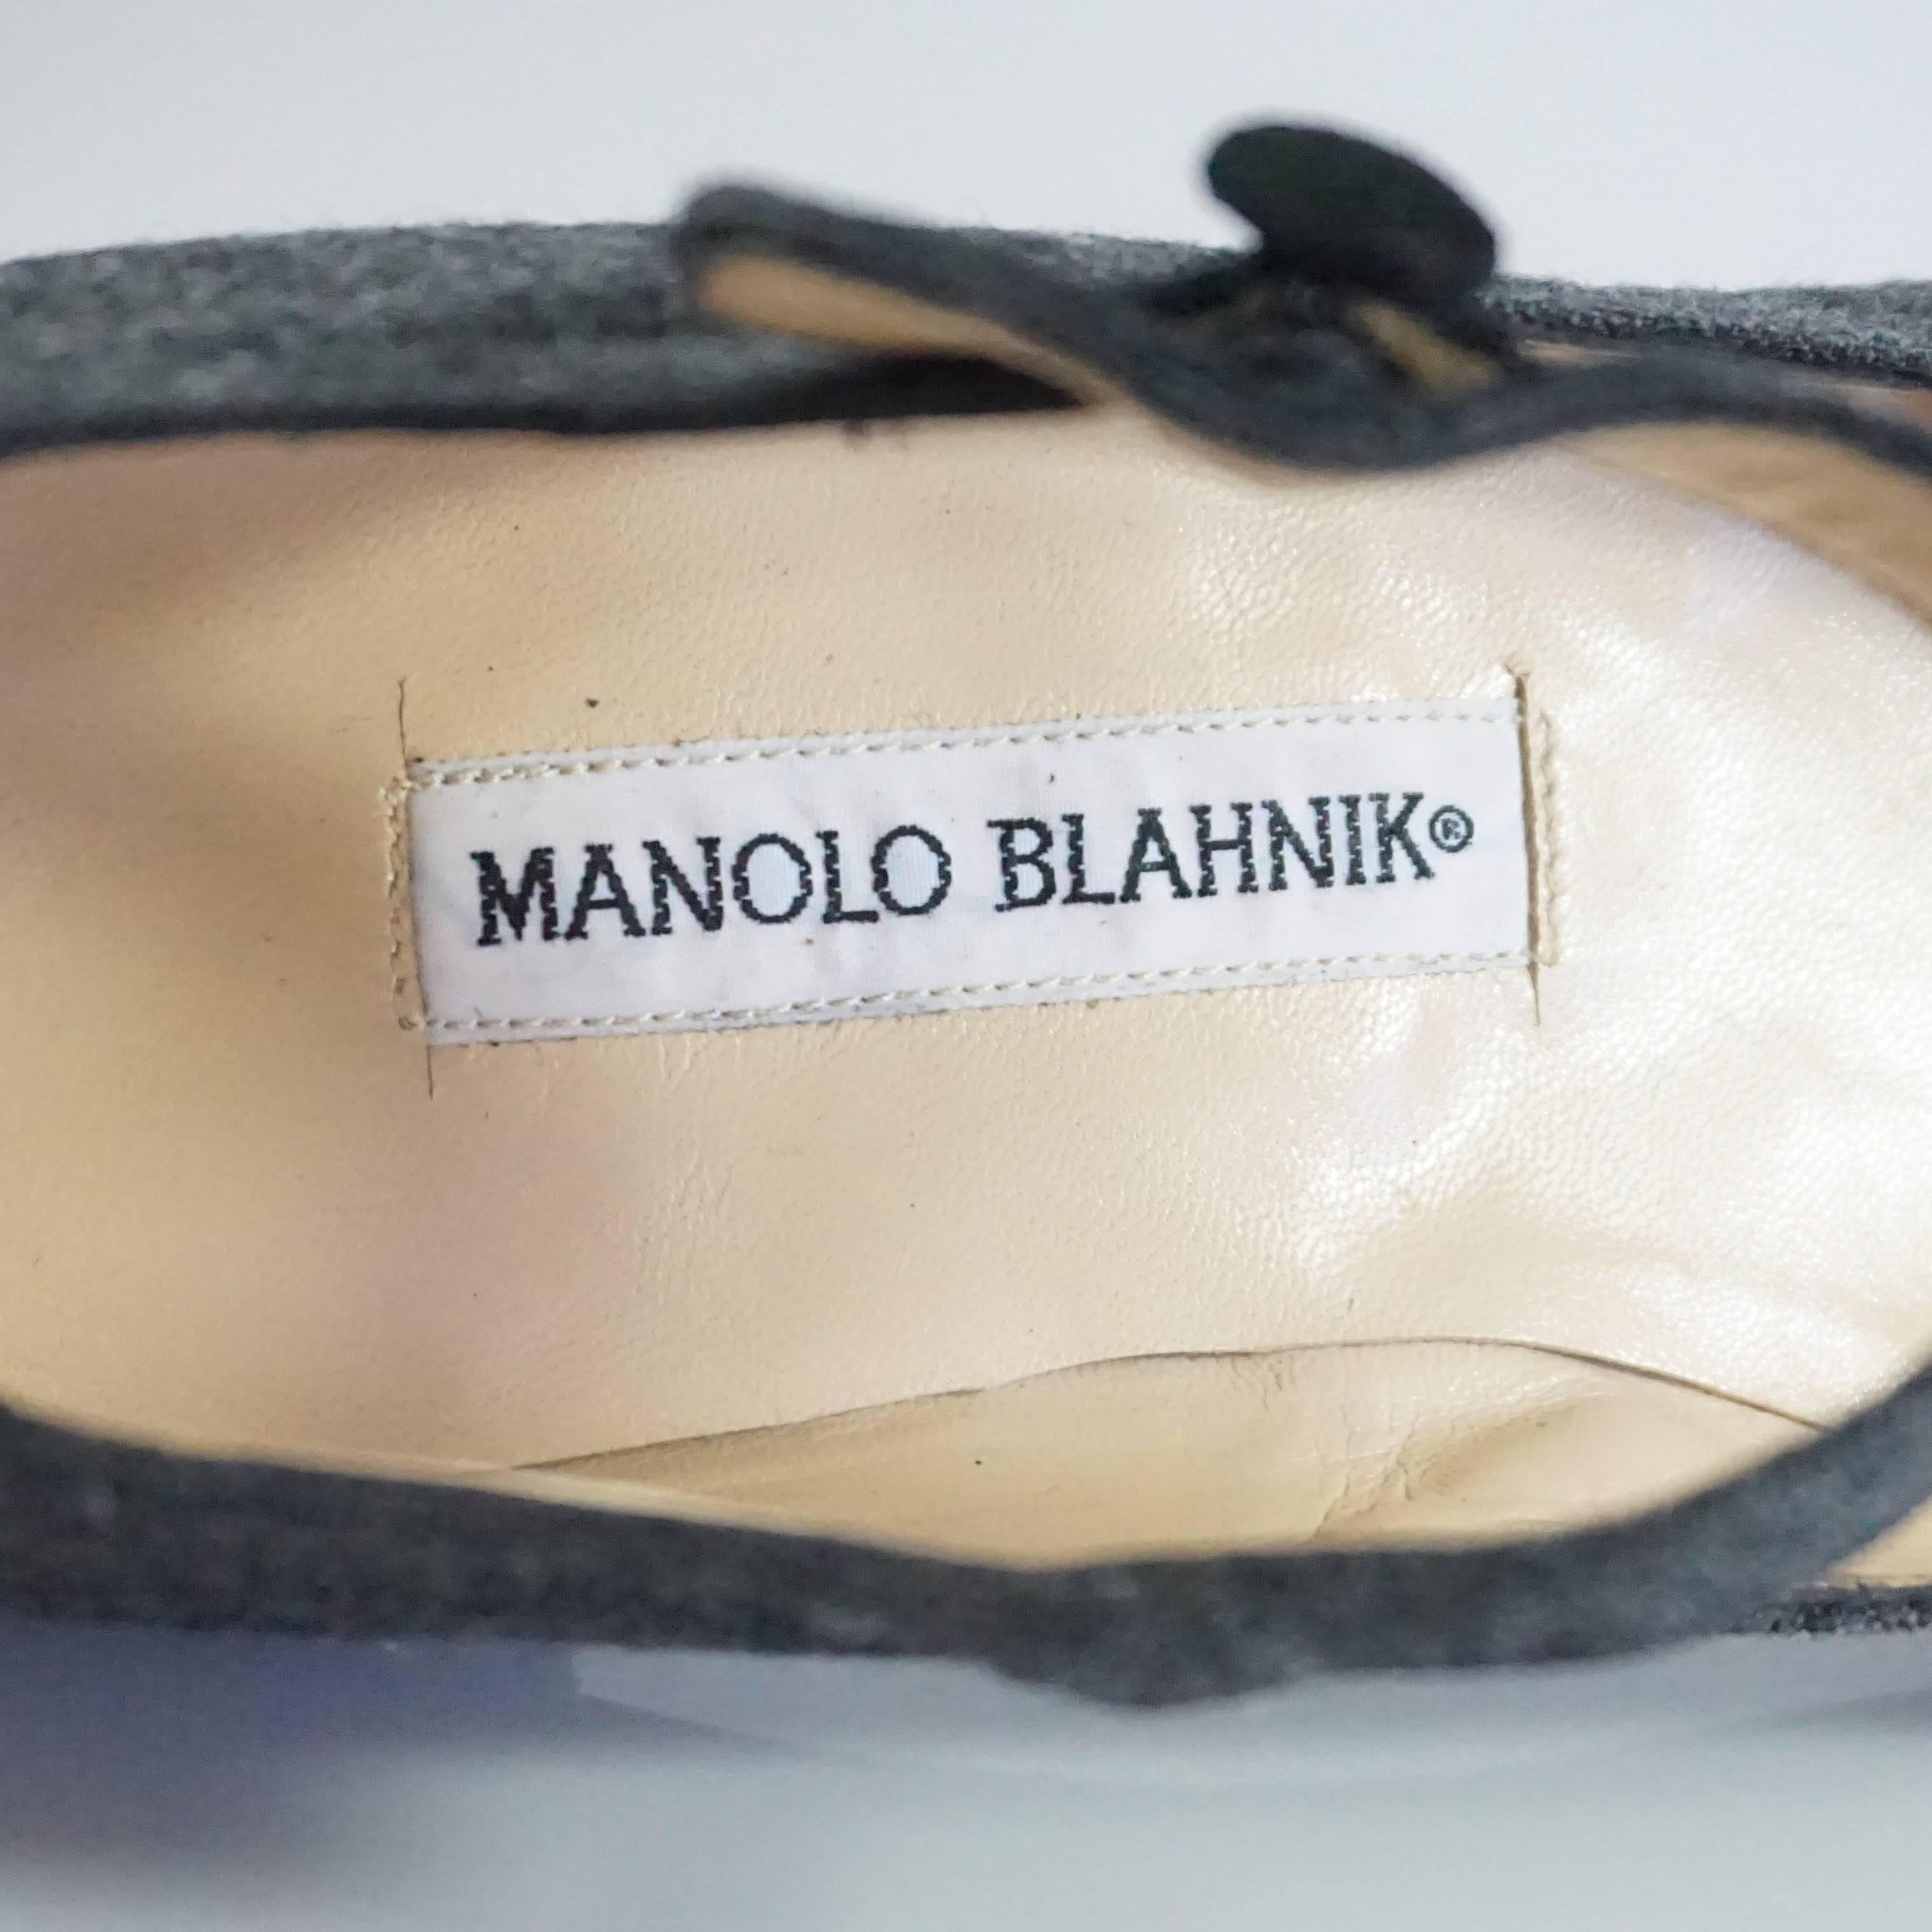 Manolo Blahnik Grey Wool and Black Suede Mary Jane Style Shoes-37.5 In Excellent Condition For Sale In West Palm Beach, FL